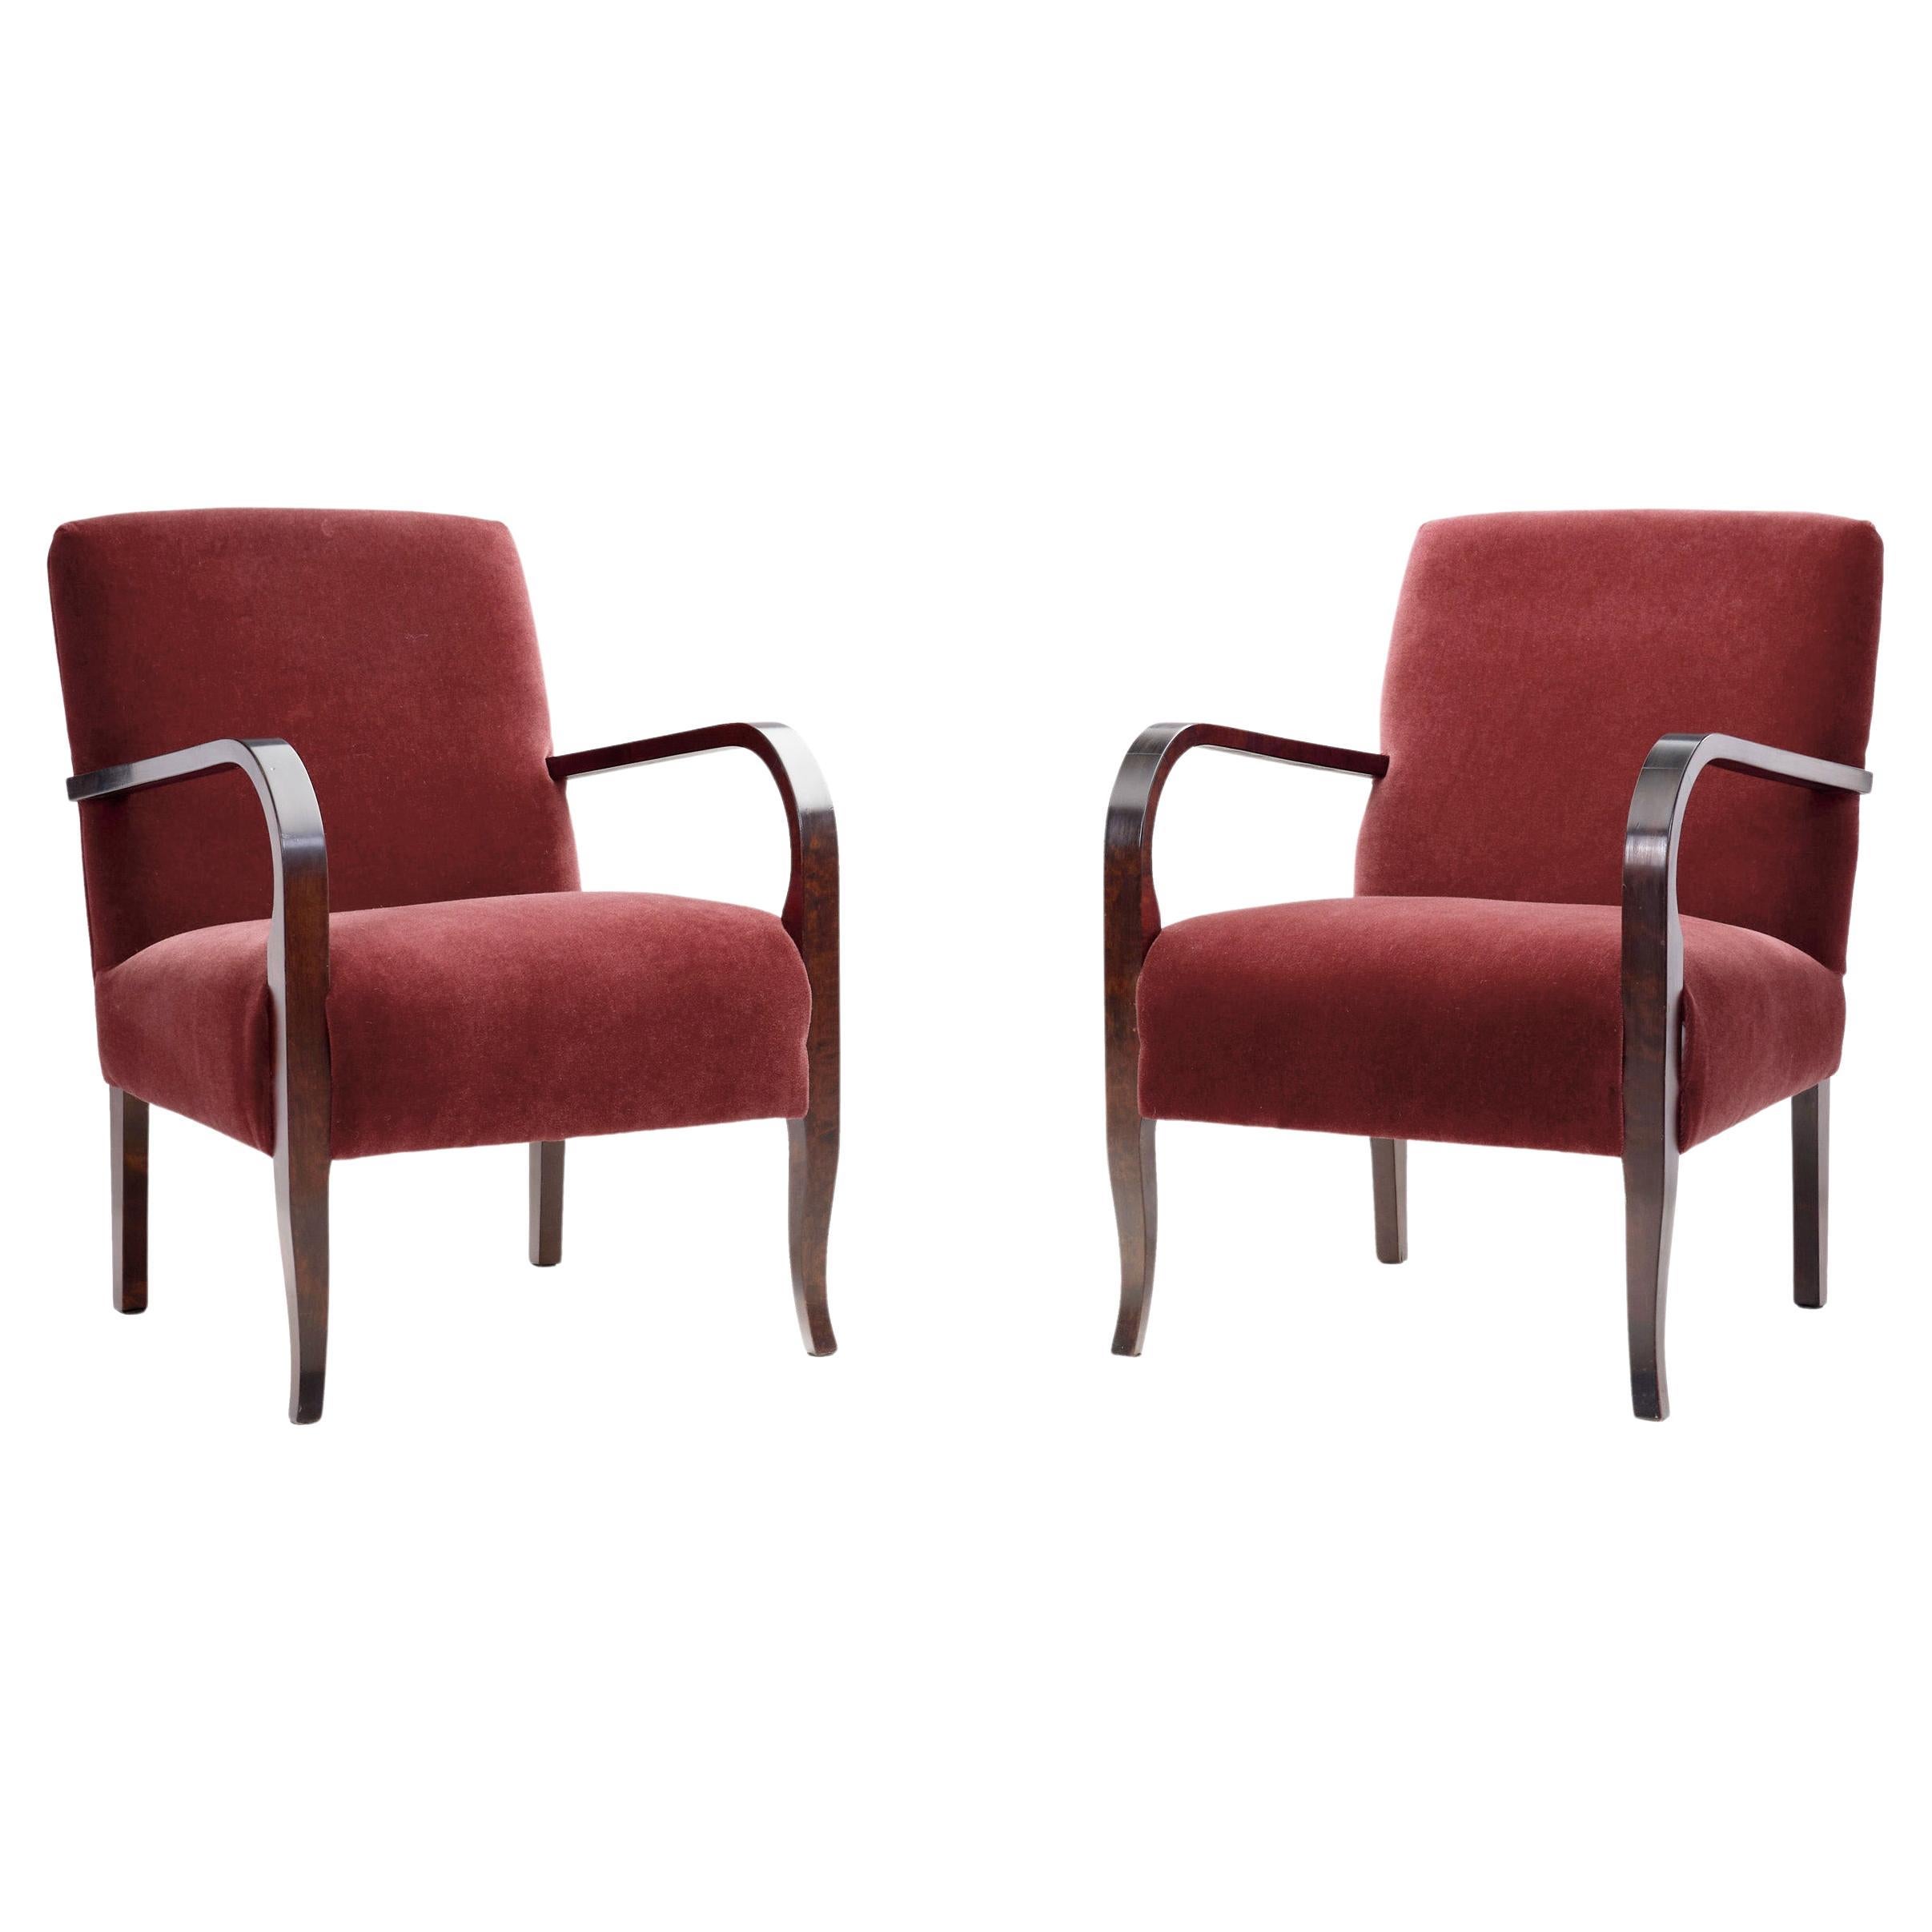 Upholstered Art Deco Armchairs with Birch Frames, Europe ca 1930s For Sale